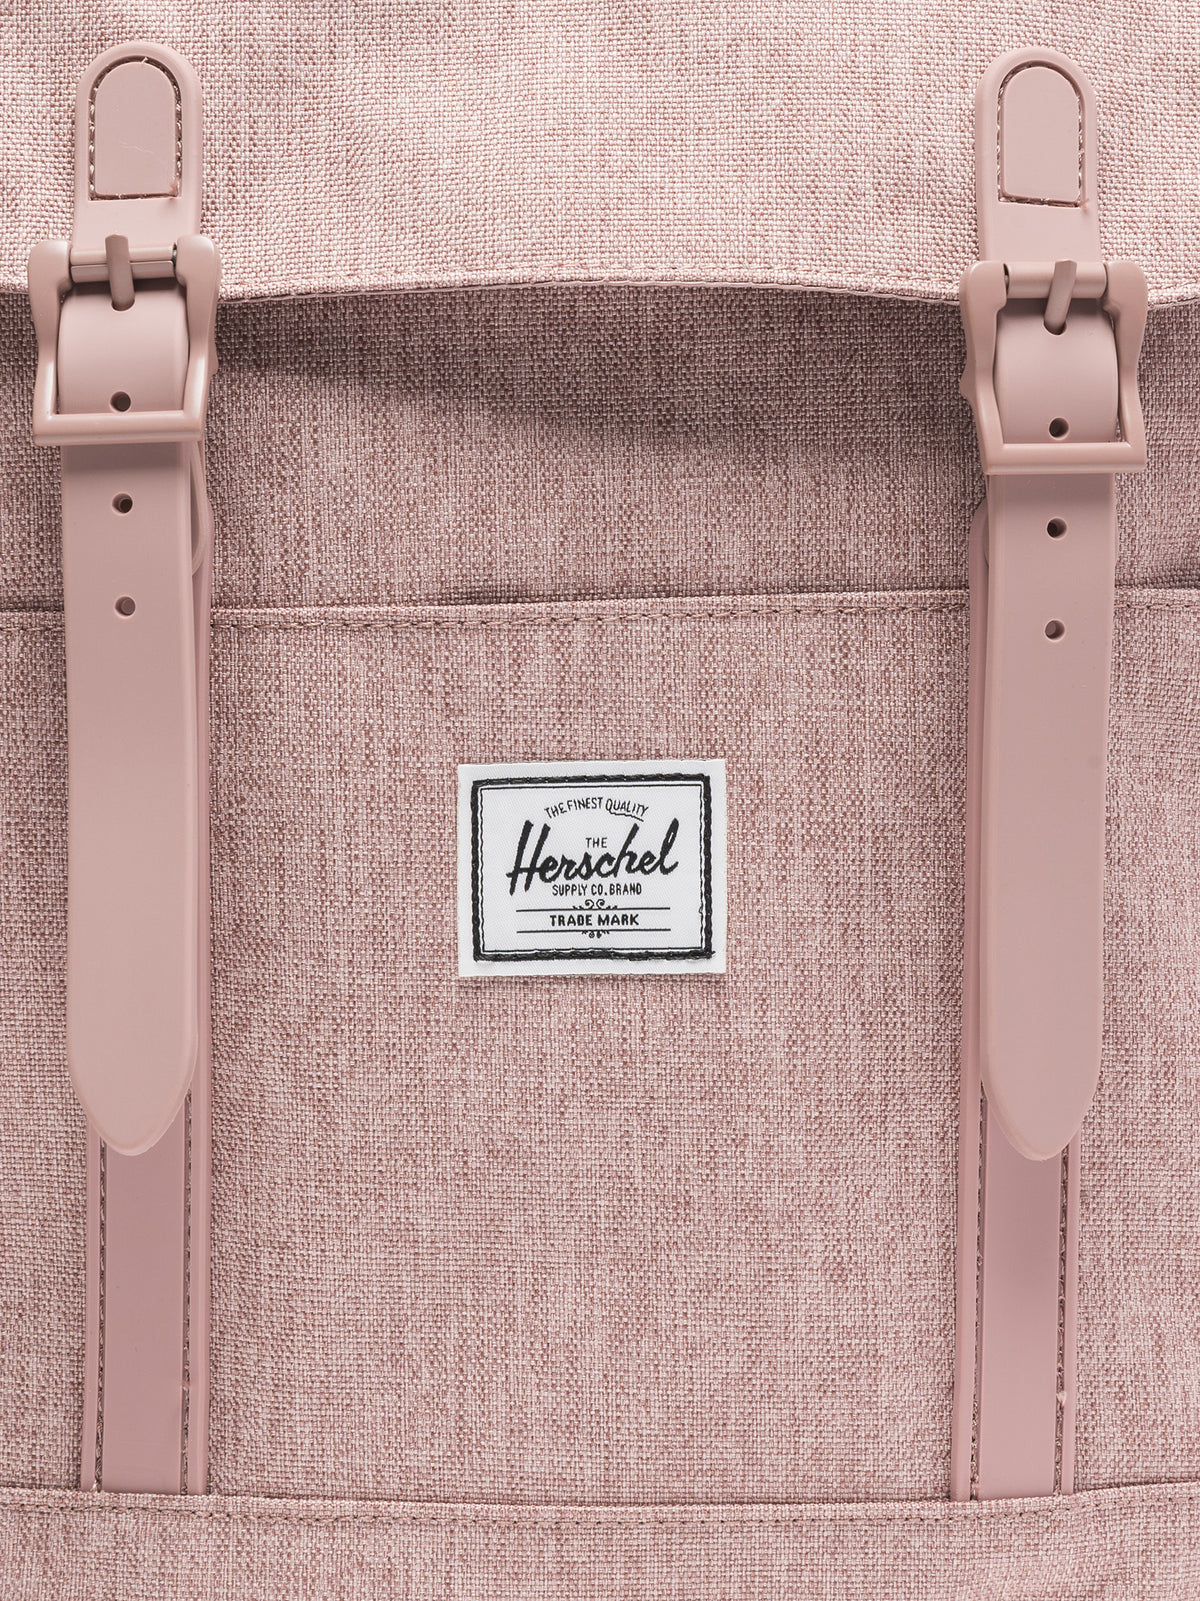 Retreat Small Backpack in Pink